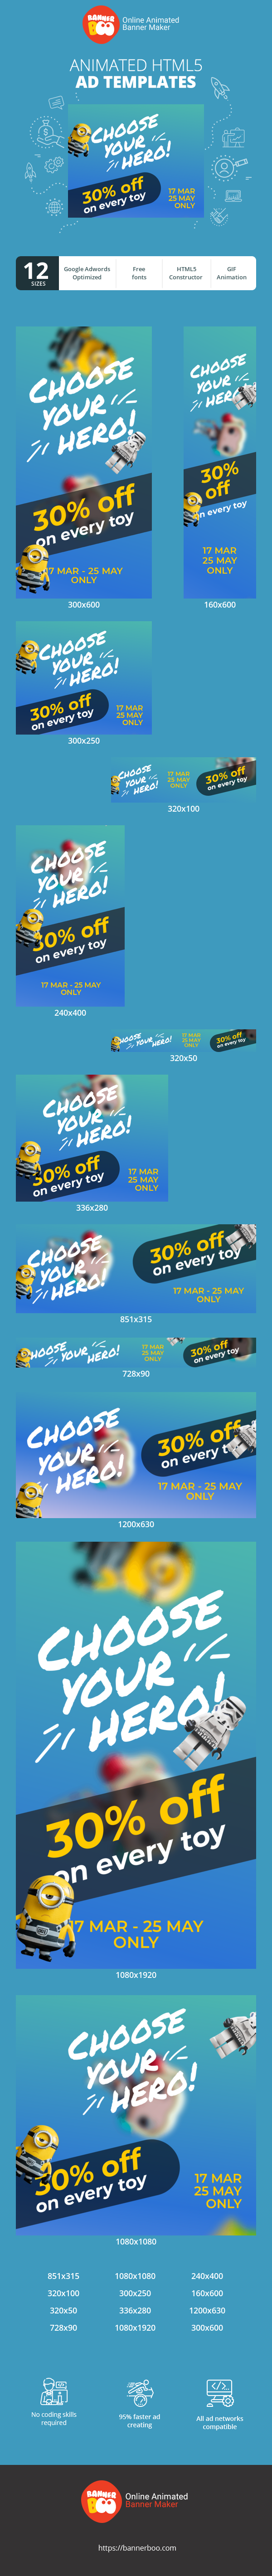 Banner ad template — Choose Your Hero — 30% Off On Every Toy 17 Mar - 25 May Only